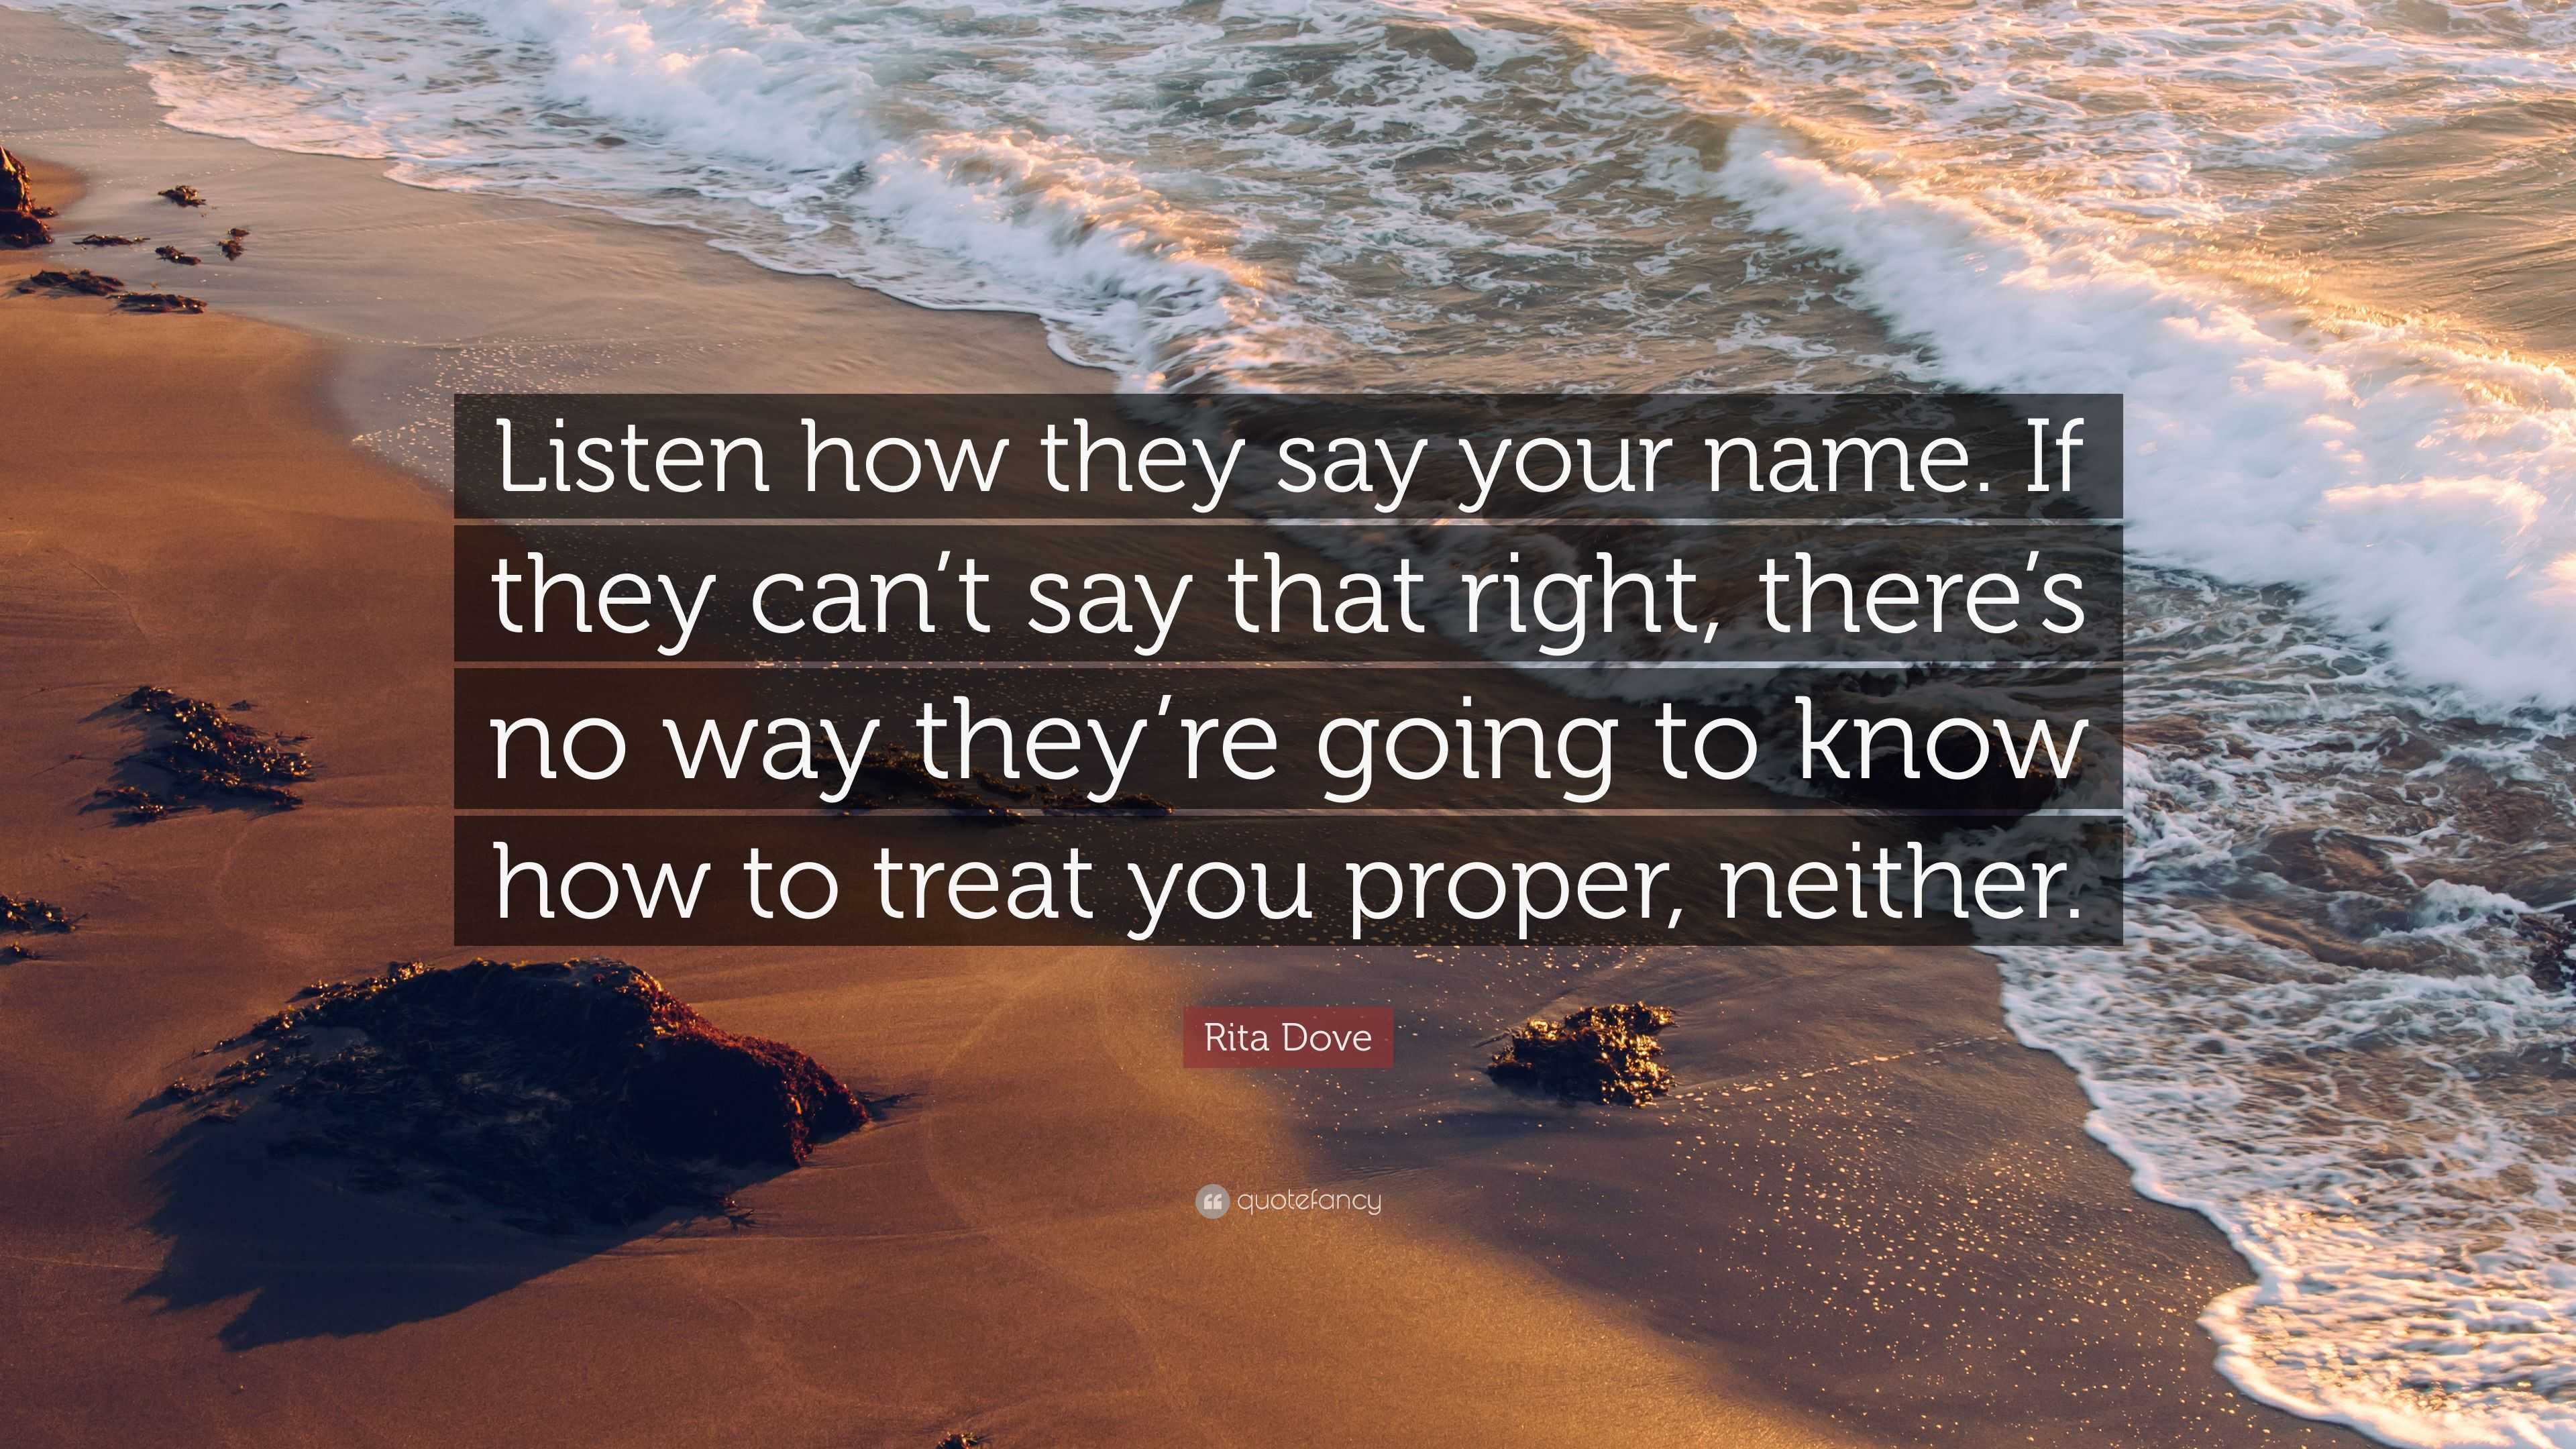 Rita Dove Quote: “Listen how they say your name. If they can’t say that ...